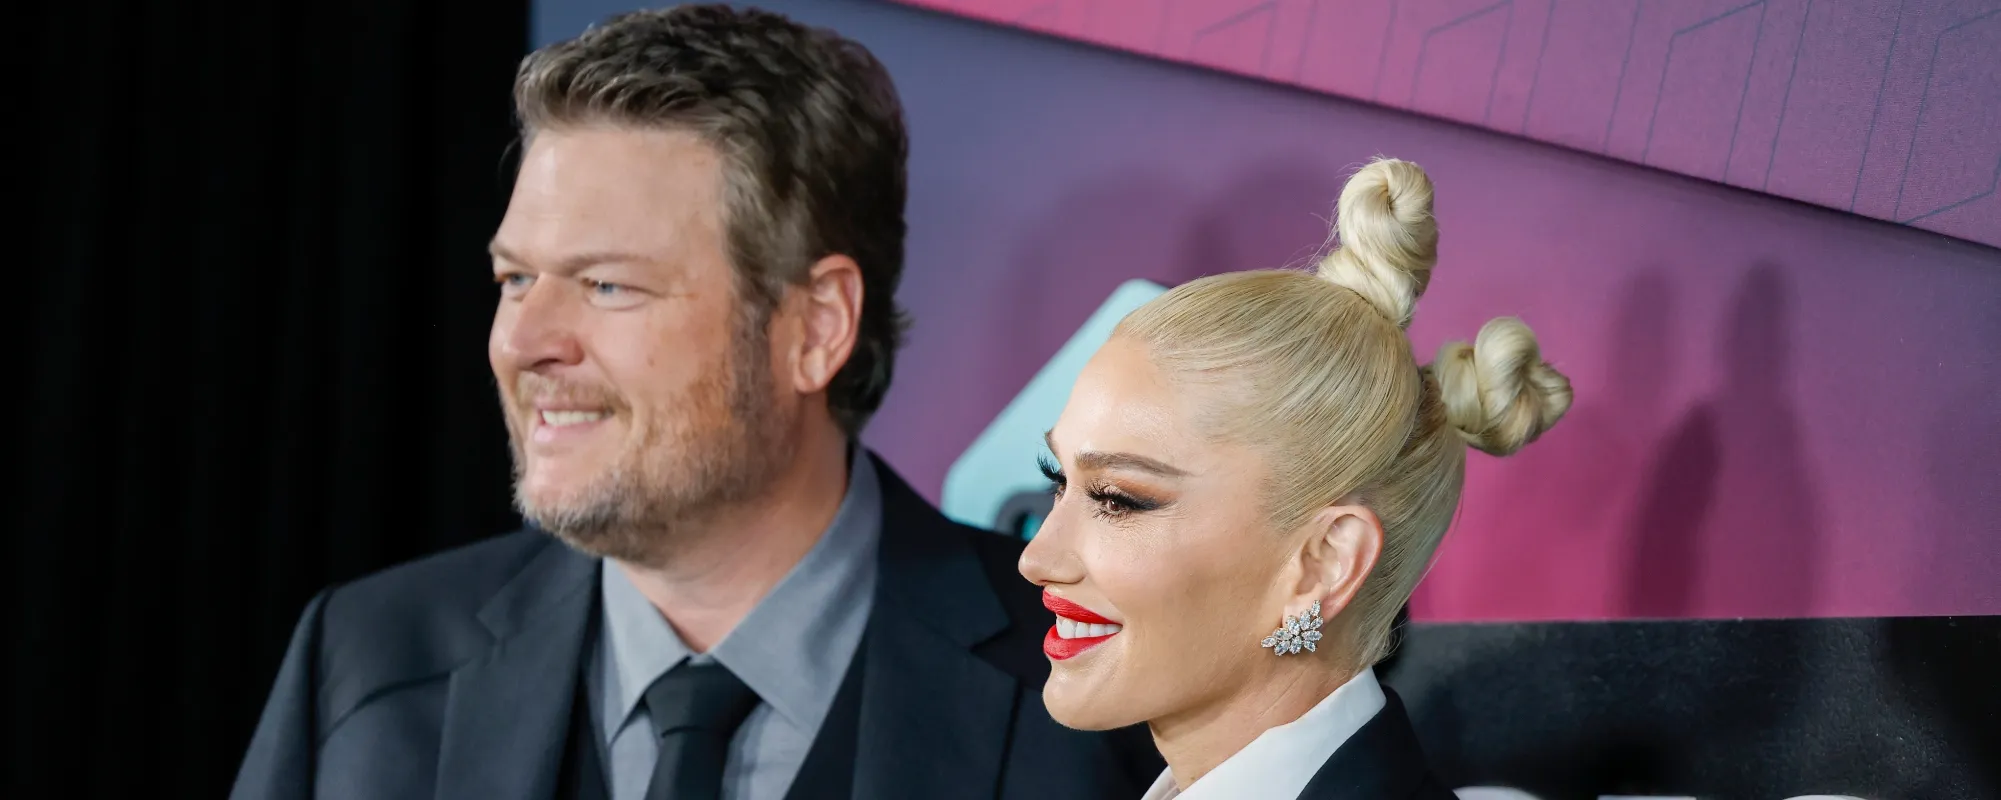 Blake Shelton Is All Smiles as He Proudly Watches Gwen Stefani Be Inducted Into Her Hometown Hall of Fame